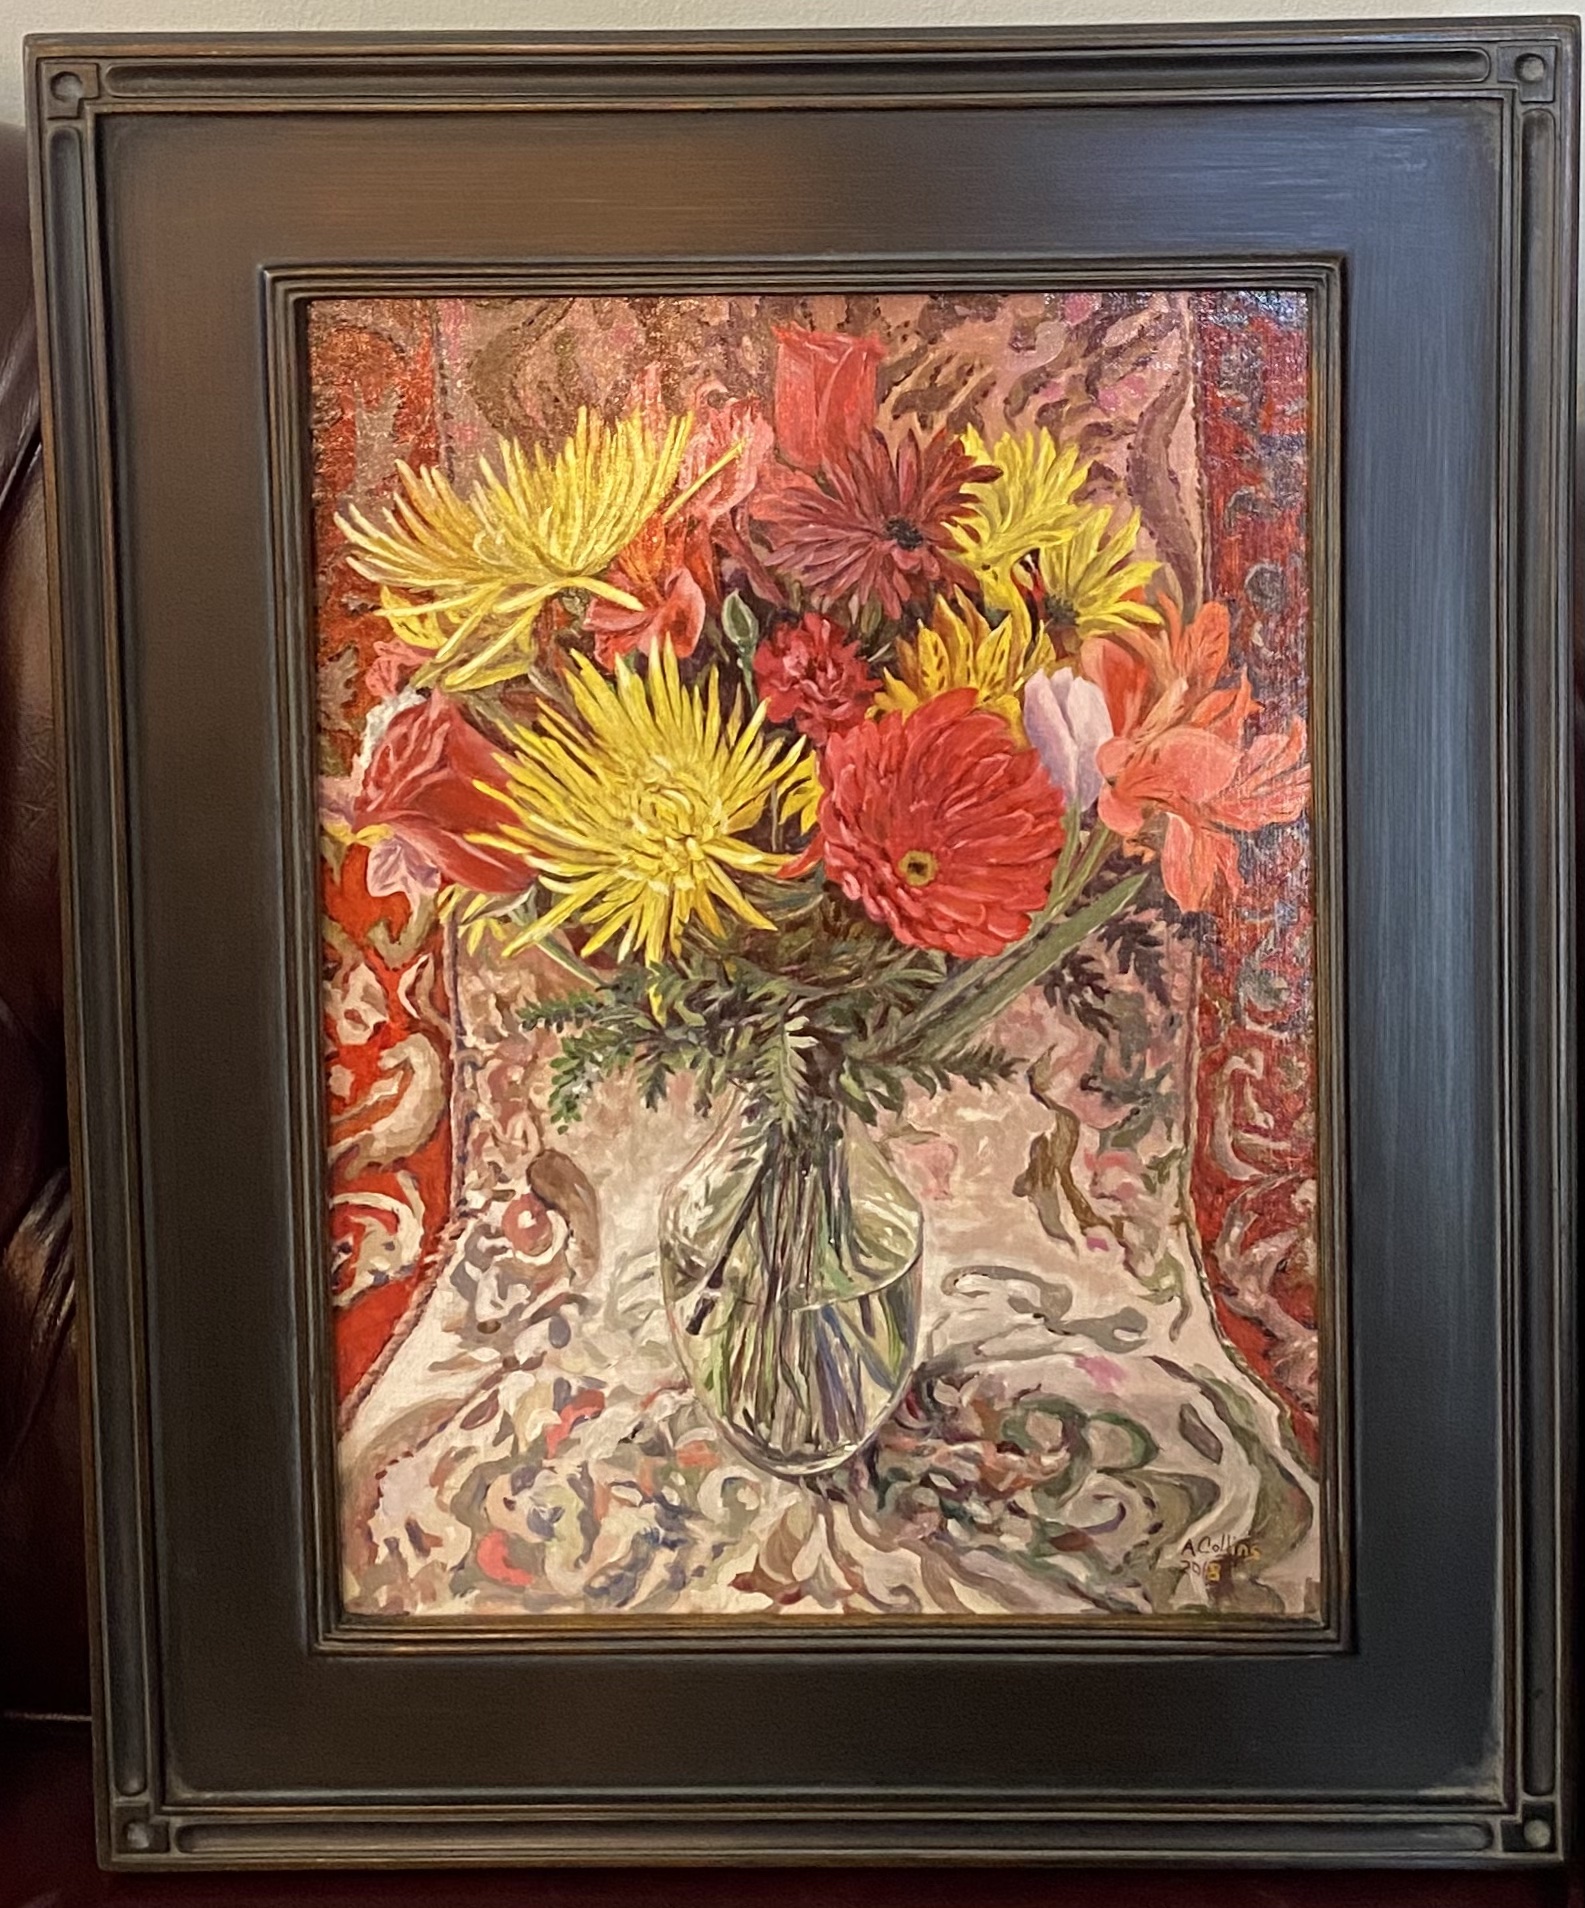 Flowers on a Persian Rug
Oil
11" X 14"
$375.